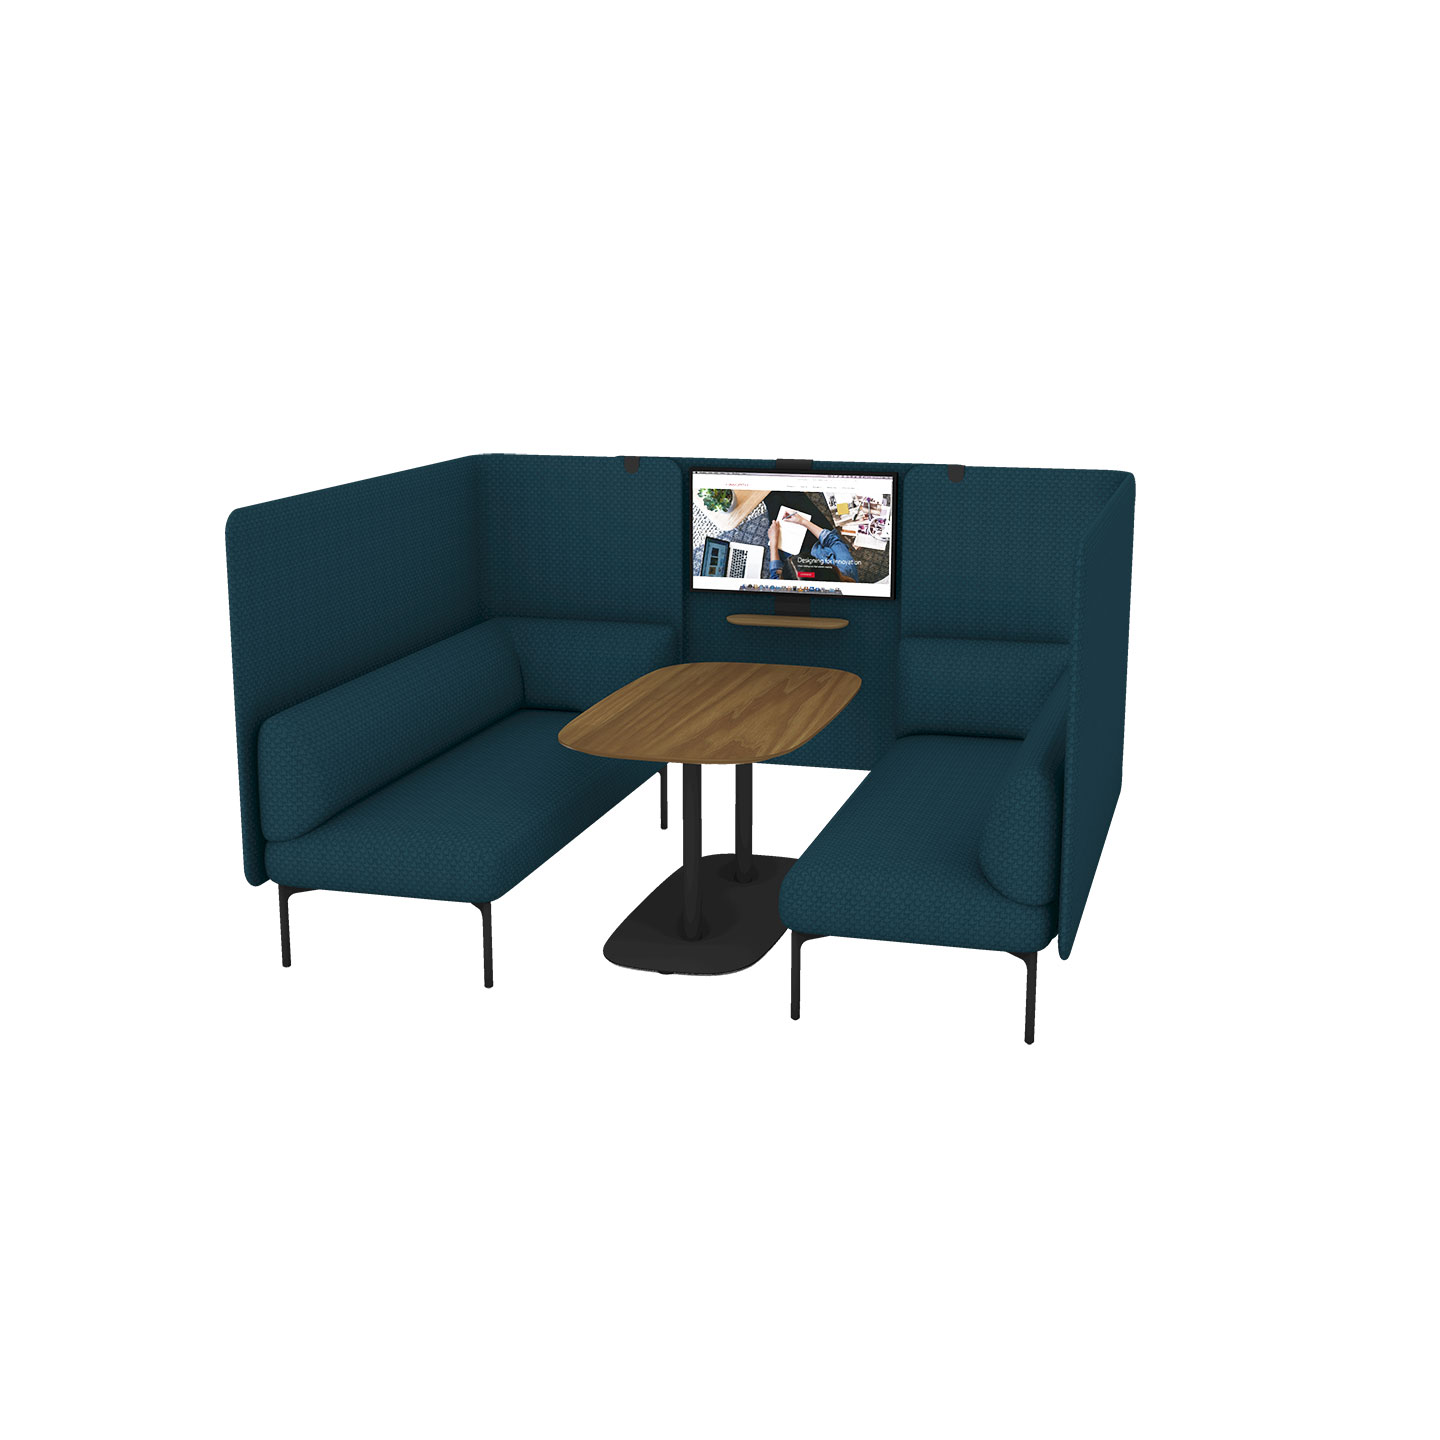 Haworth Cabana lounge connector screen in teal blue color